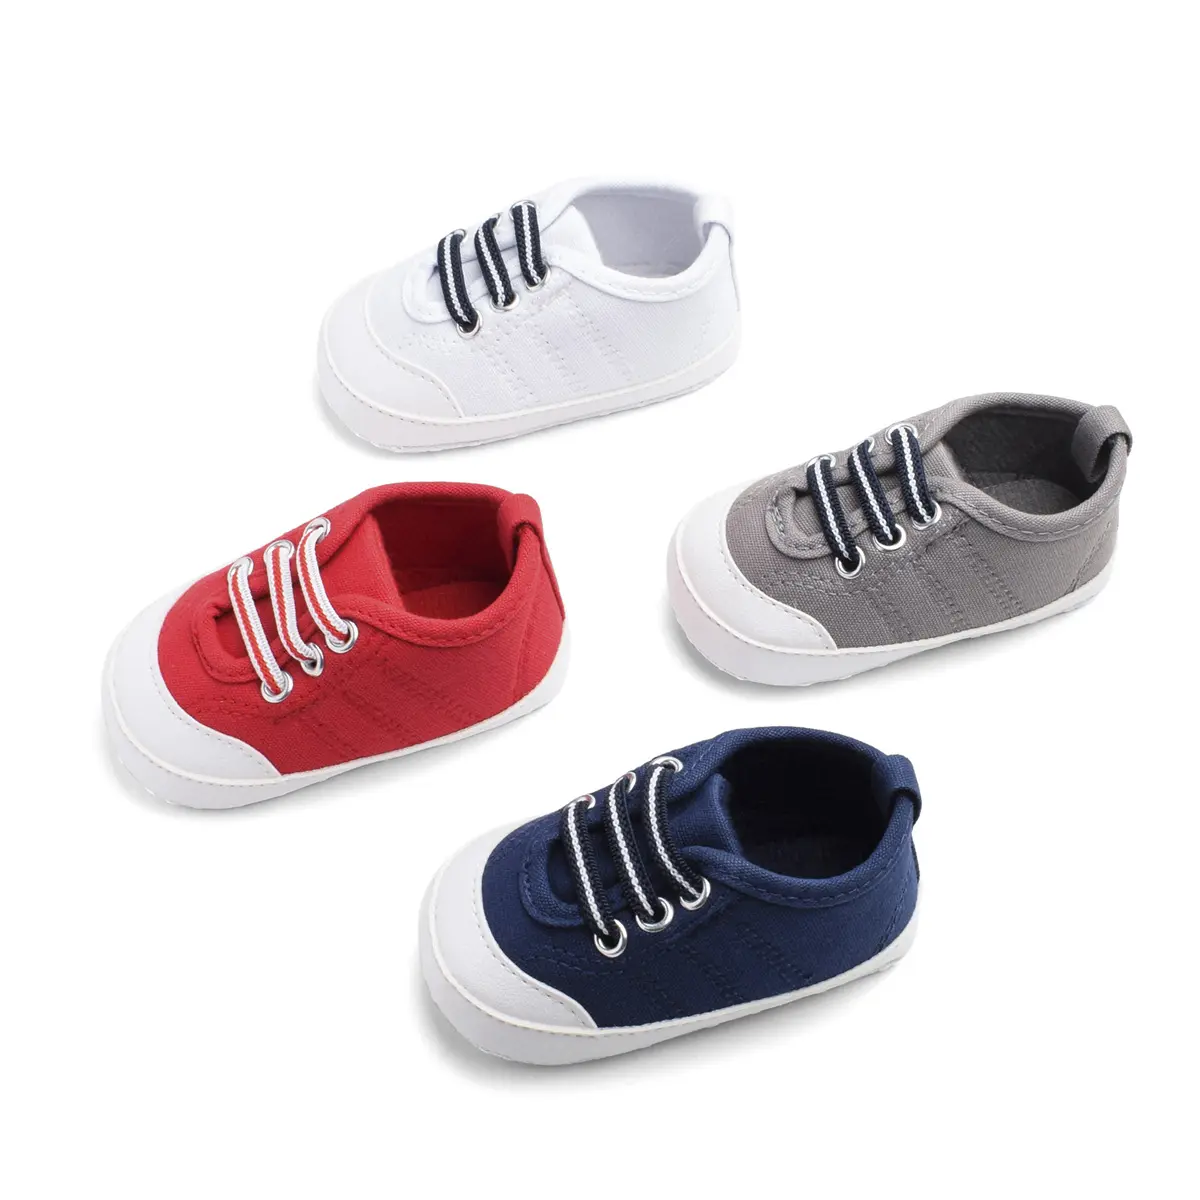 2023 Spring New Soft Sole Anti-Slip Comfortable Newborn Products Solid Baby Girl Boy Cotton First Walkers Canvas Shoes